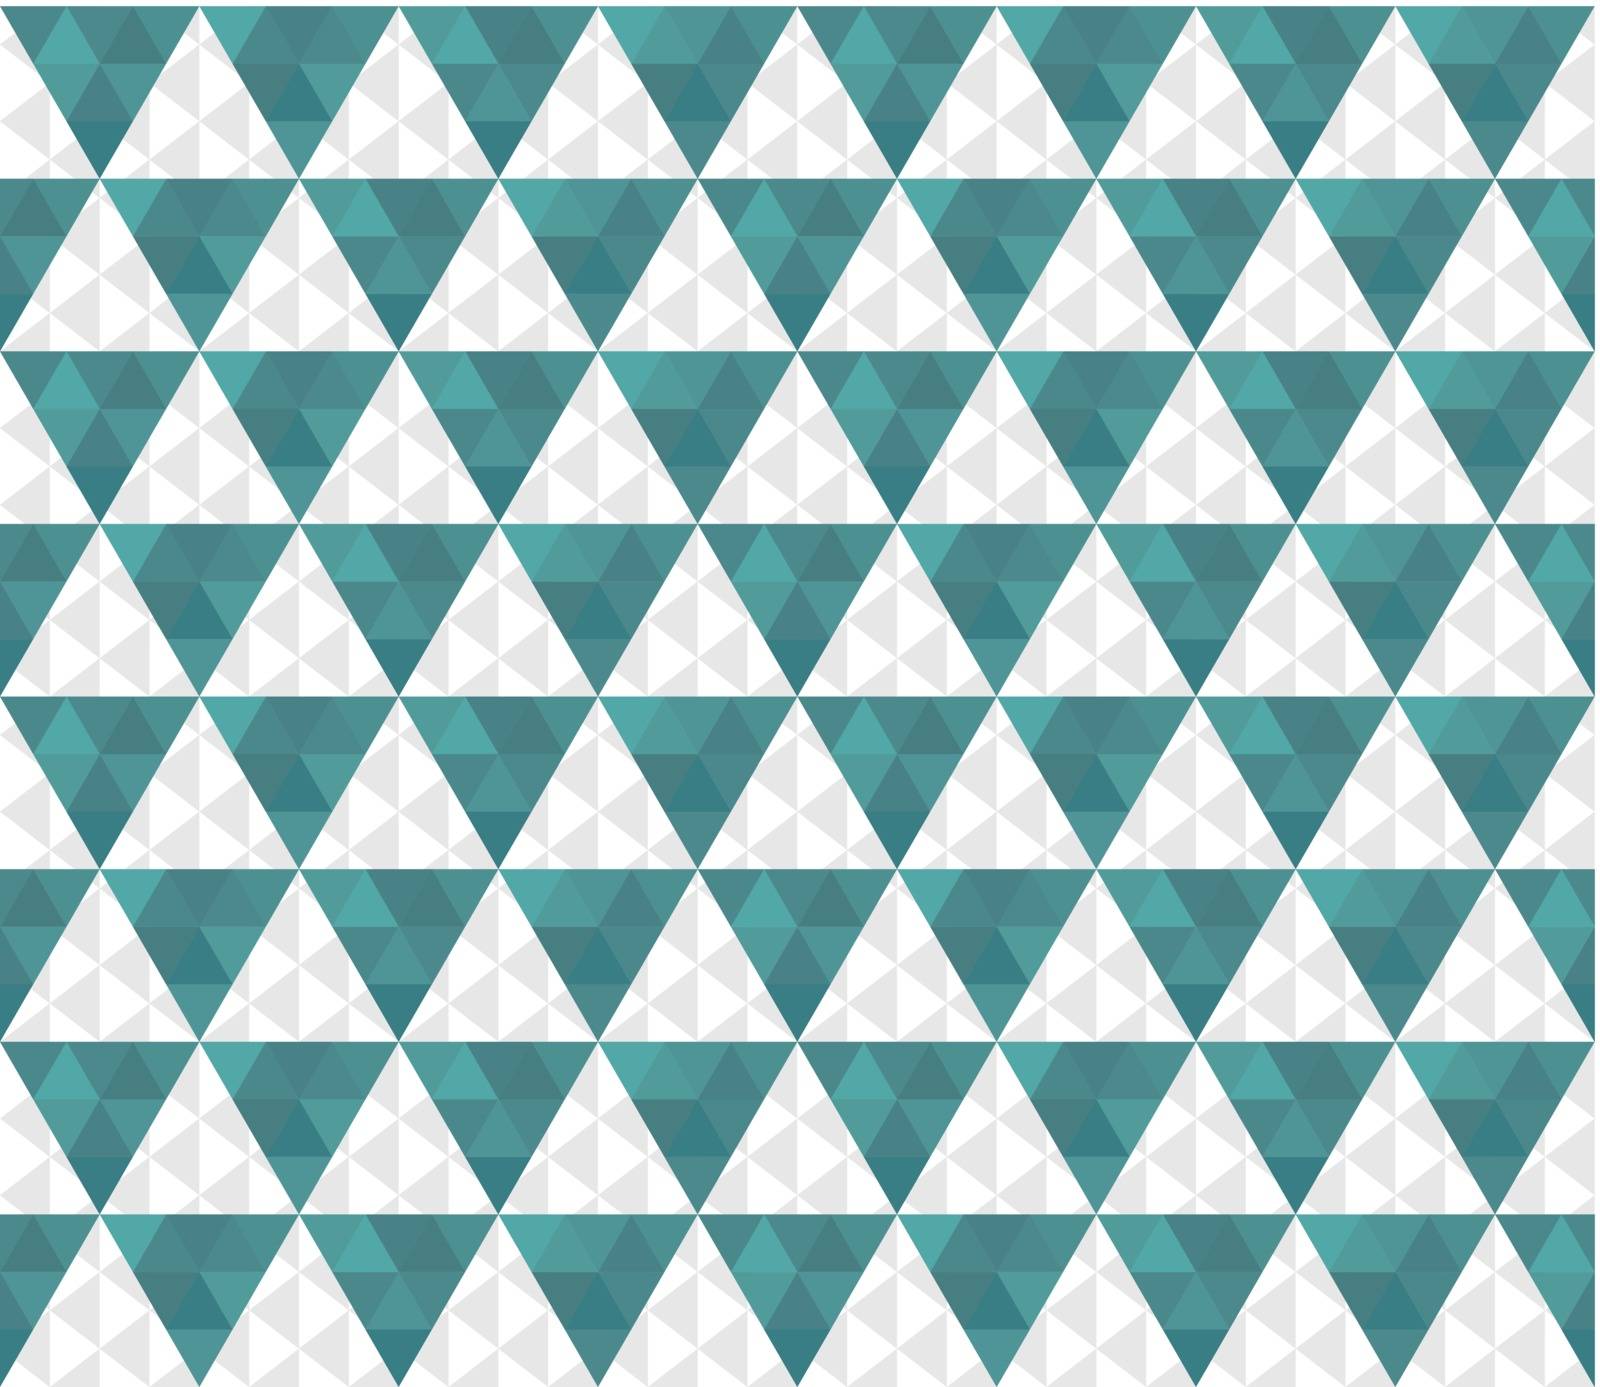 Triangle pattern background, triangle background, vector illustration with plenty space for your text